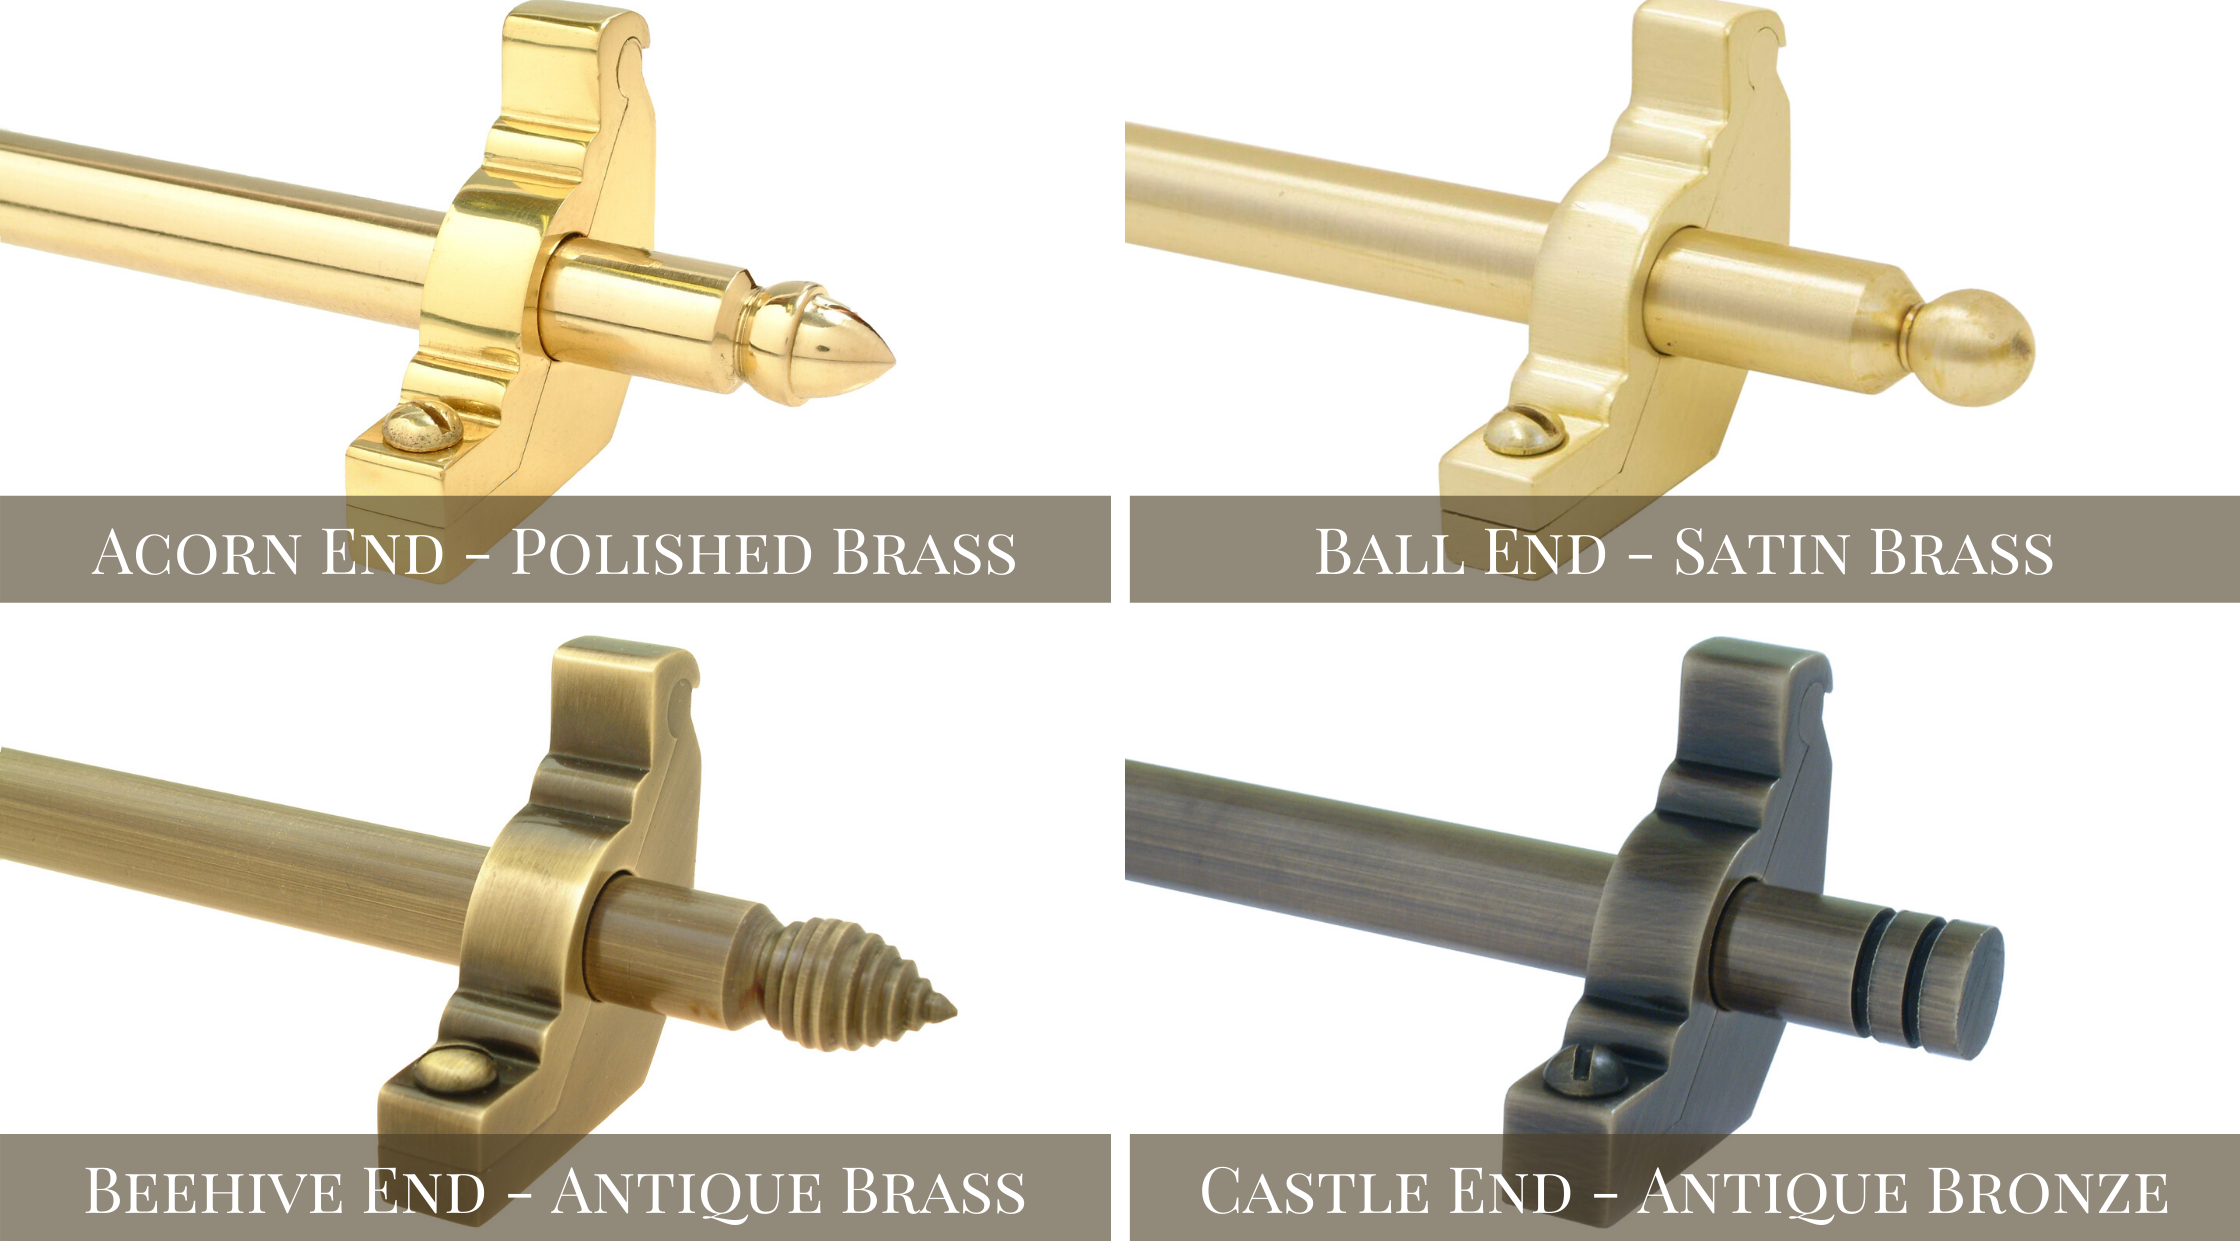 Stair rods - Brass and Bronze